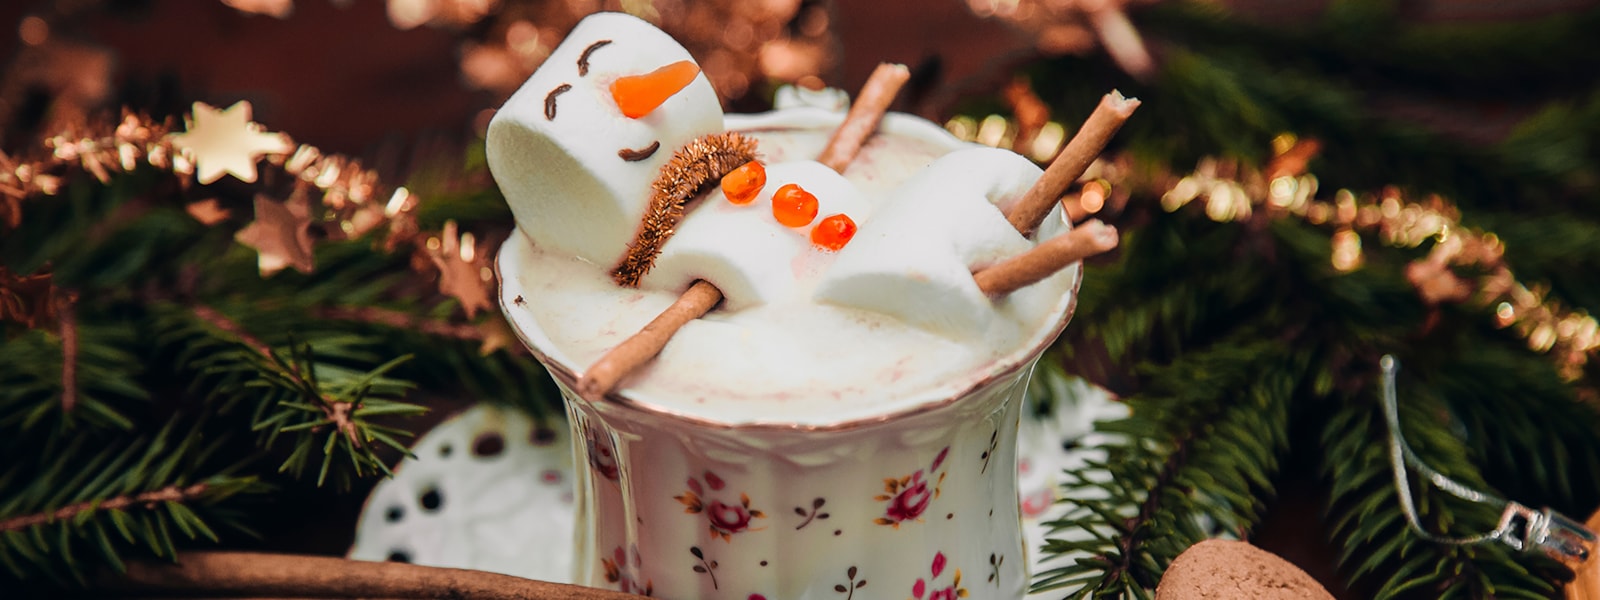 marshmallow snowman in cup of hot chocolate